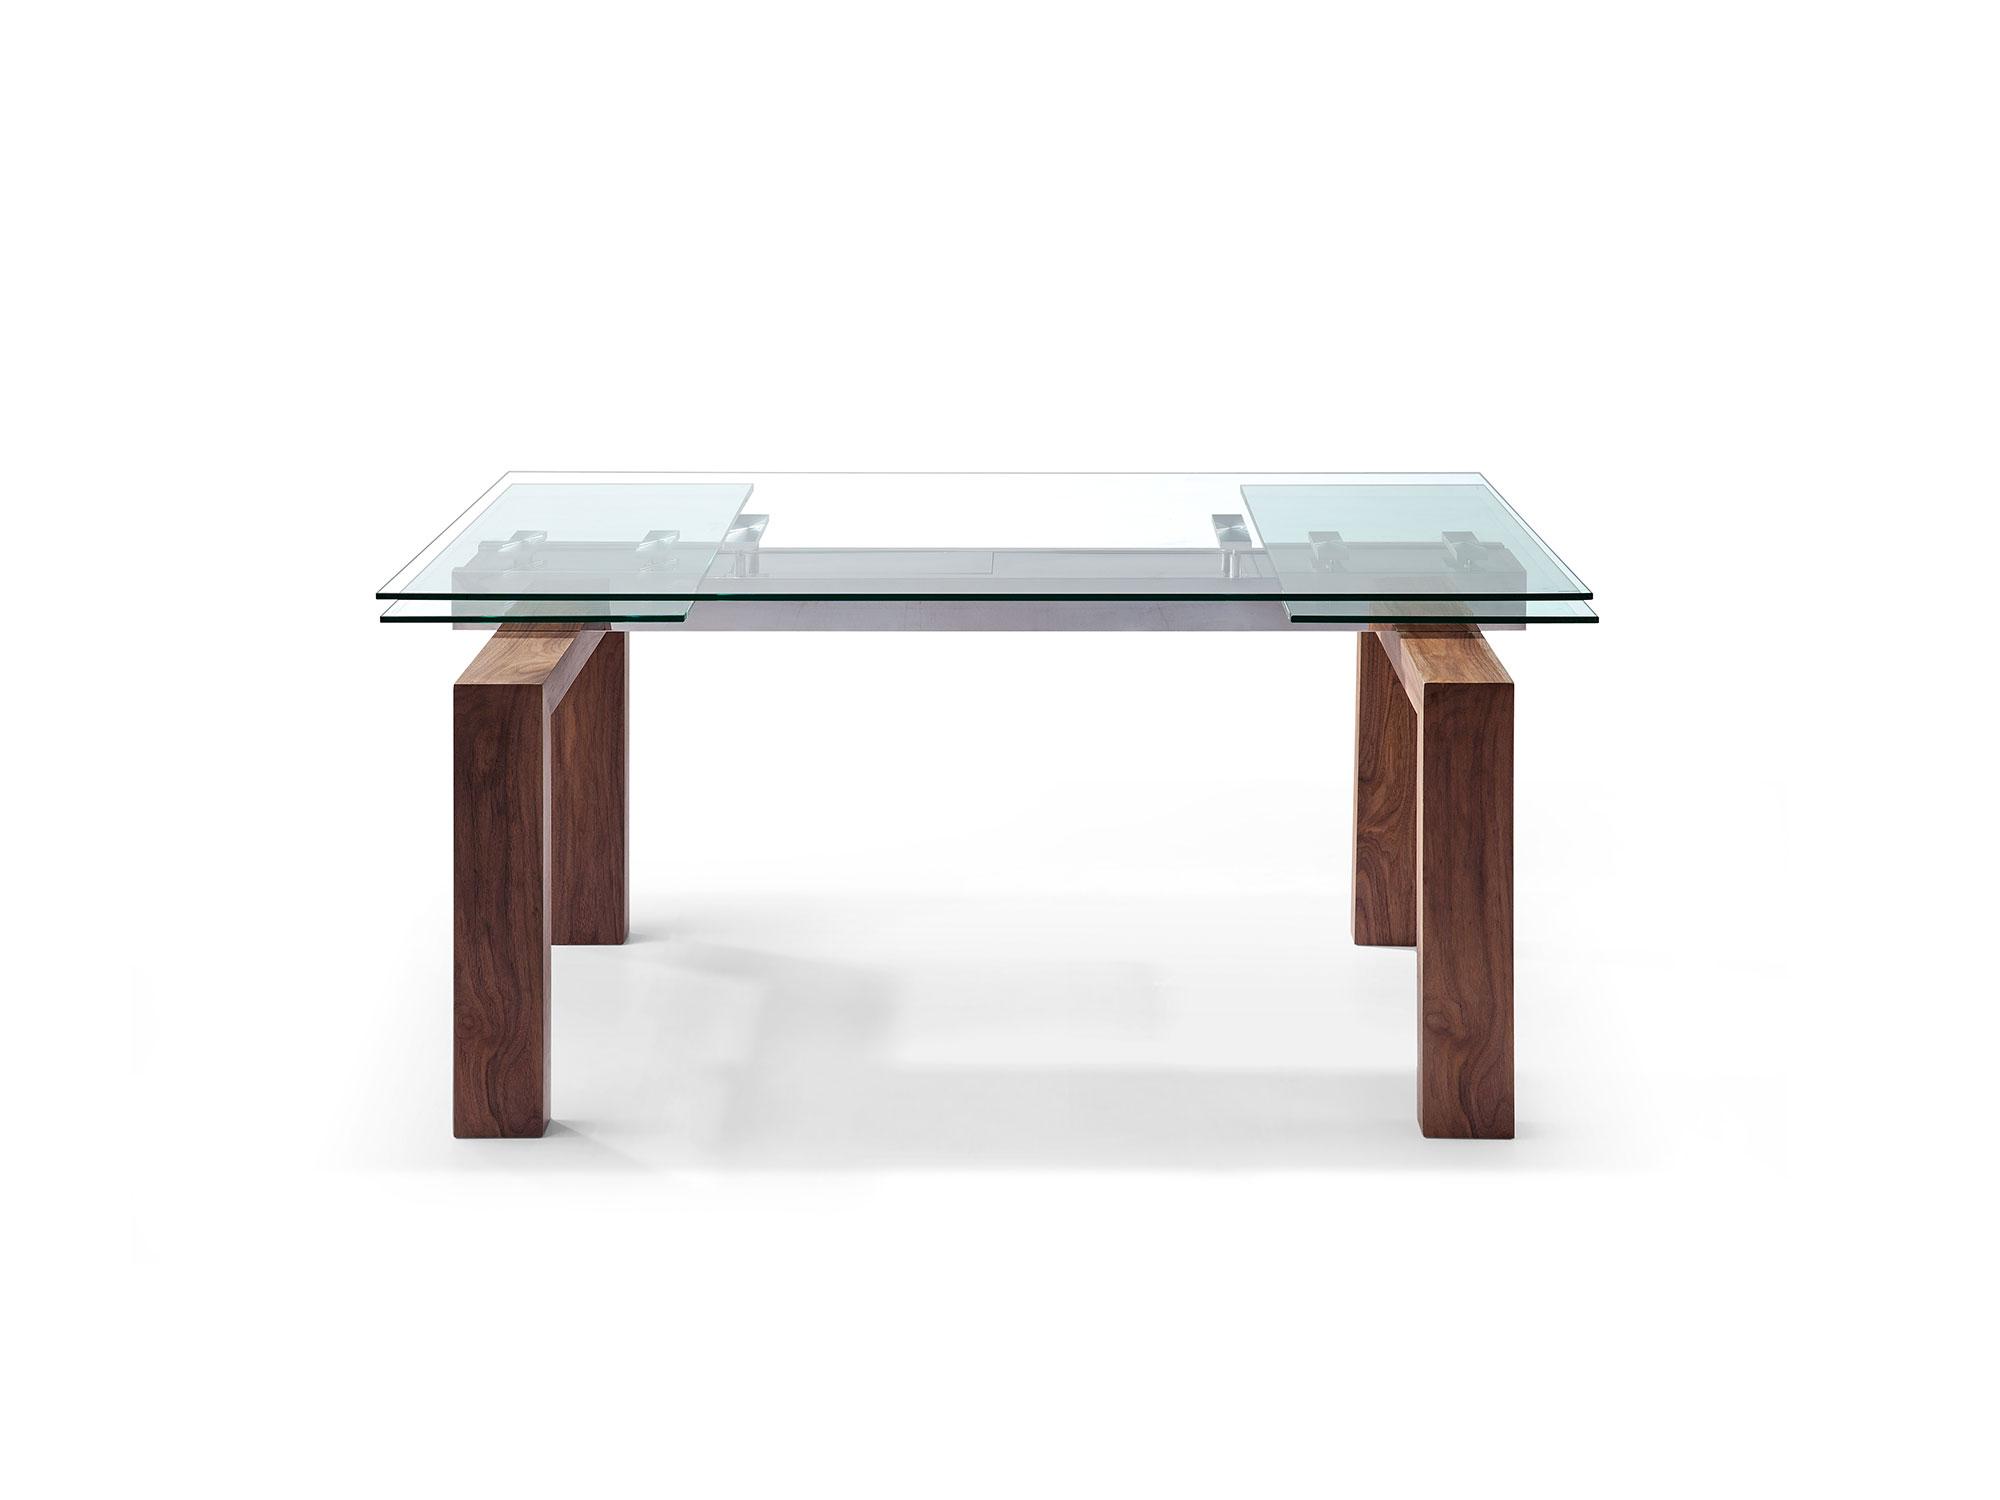 Modern Dining Table DT1256-WLT Davy DT1256-WLT in Walnut 